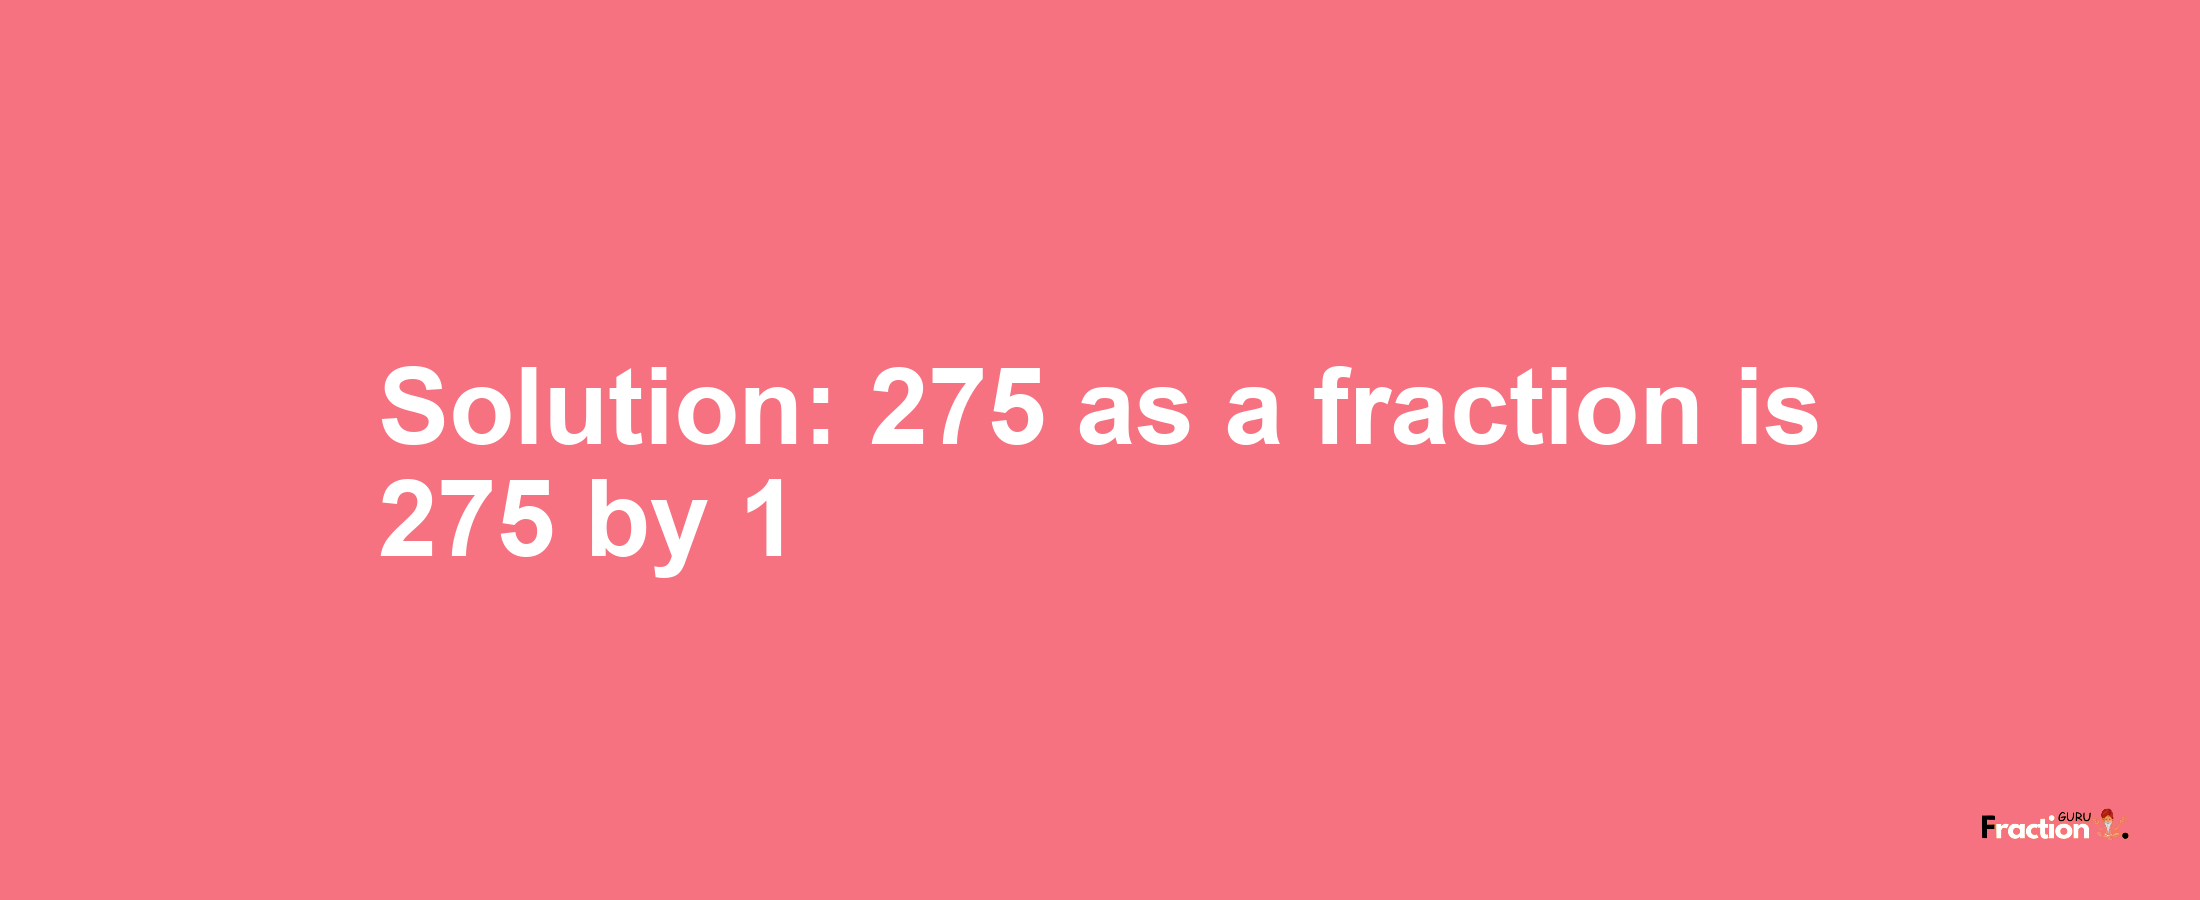 Solution:275 as a fraction is 275/1